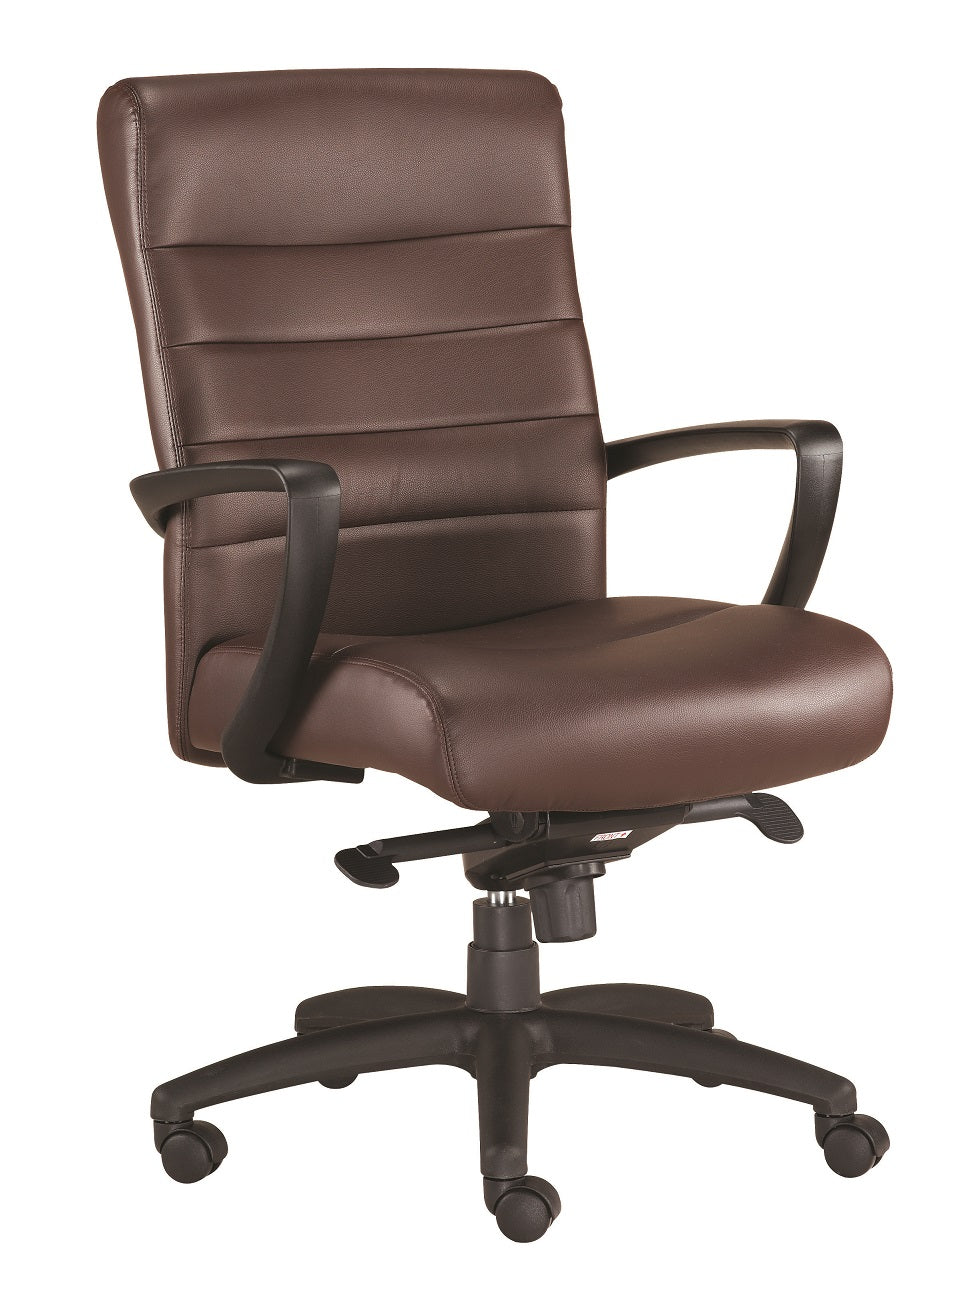 Brown Faux Leather Tufted Seat Swivel Adjustable Task Chair Leather Back Plastic Frame